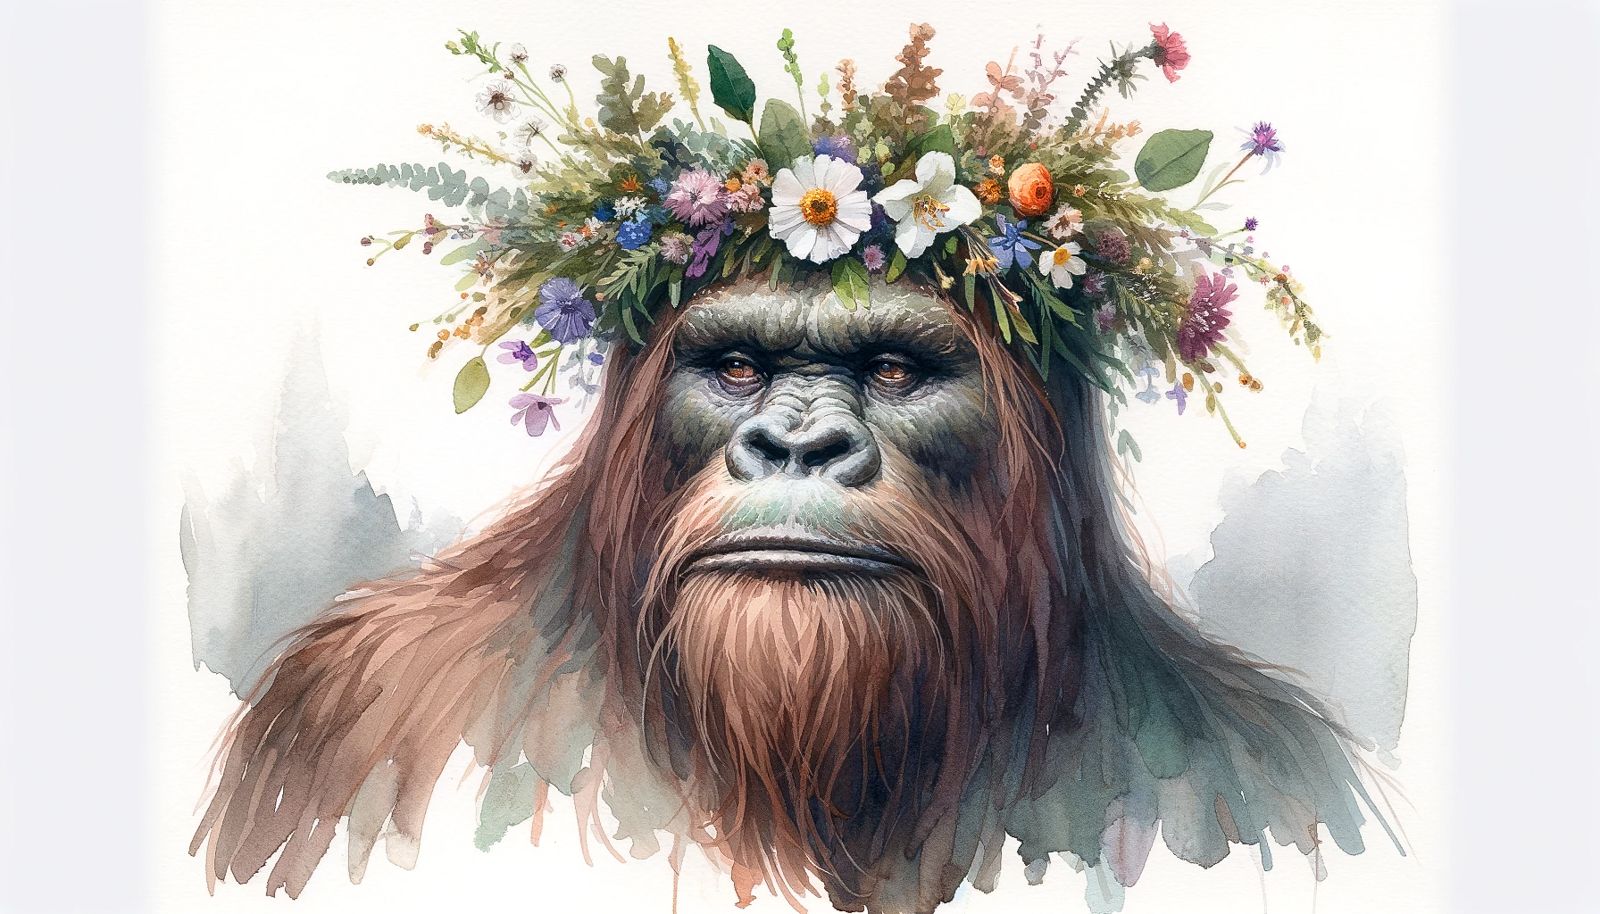 A watercolor image of Sasquatch wearing a floral crown, generated by ChatGPT